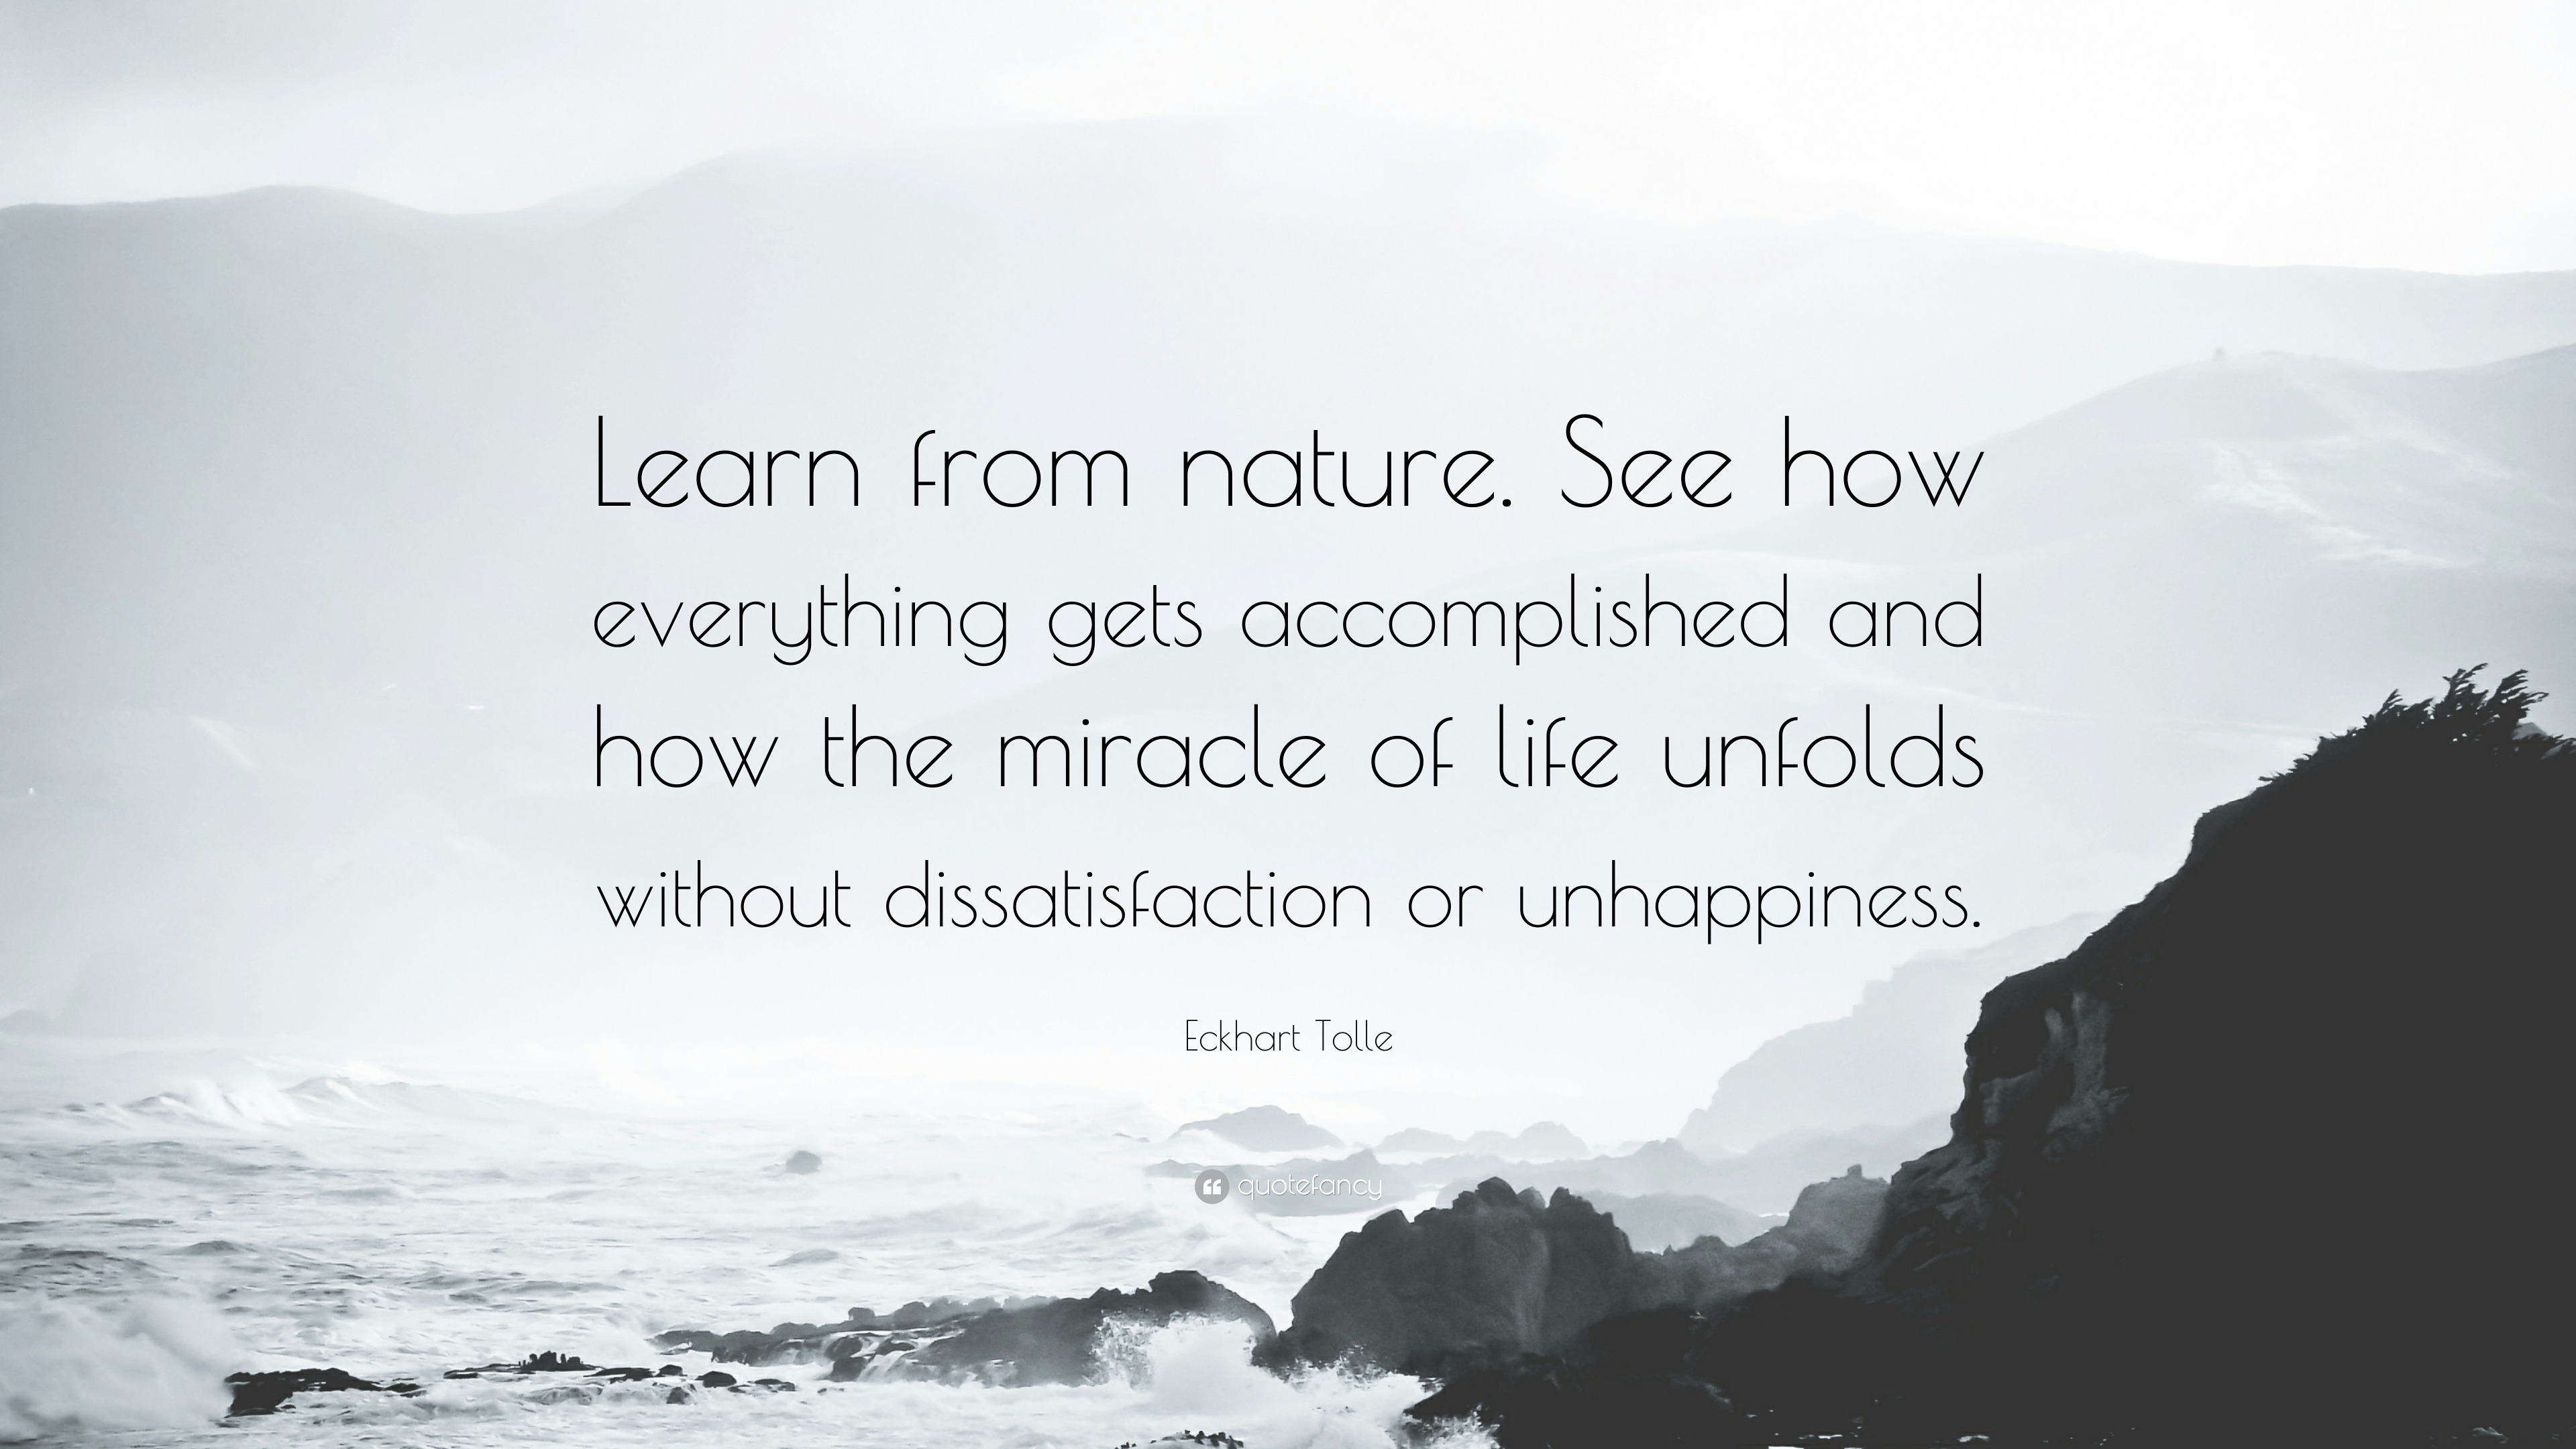 Eckhart Tolle Quote: “Learn from nature. See how everything gets accomplished and how the miracle of life unfolds without or u...”